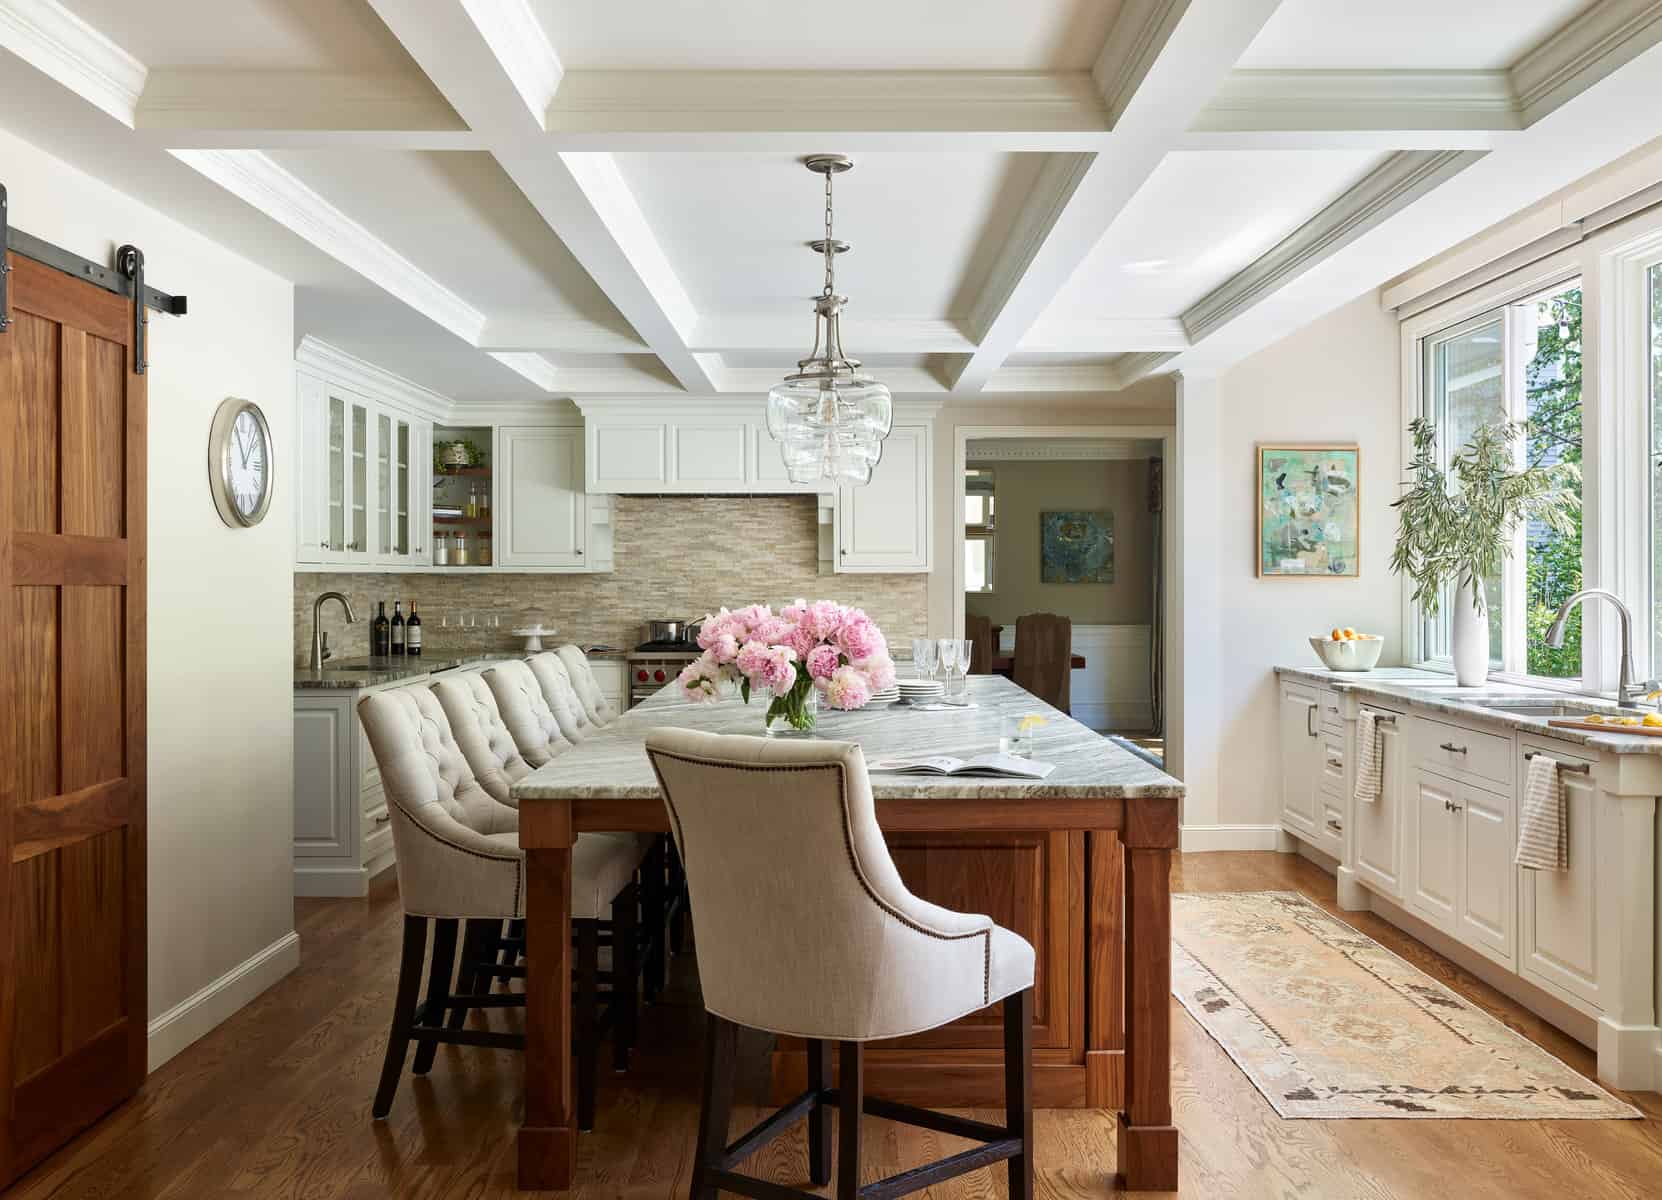 AFTER-To-improve-traffic-flow-the-the-dining-room-entry-at-far-end-was-relocated.-A-coffered-ceiling-with-crown-molding-was-created